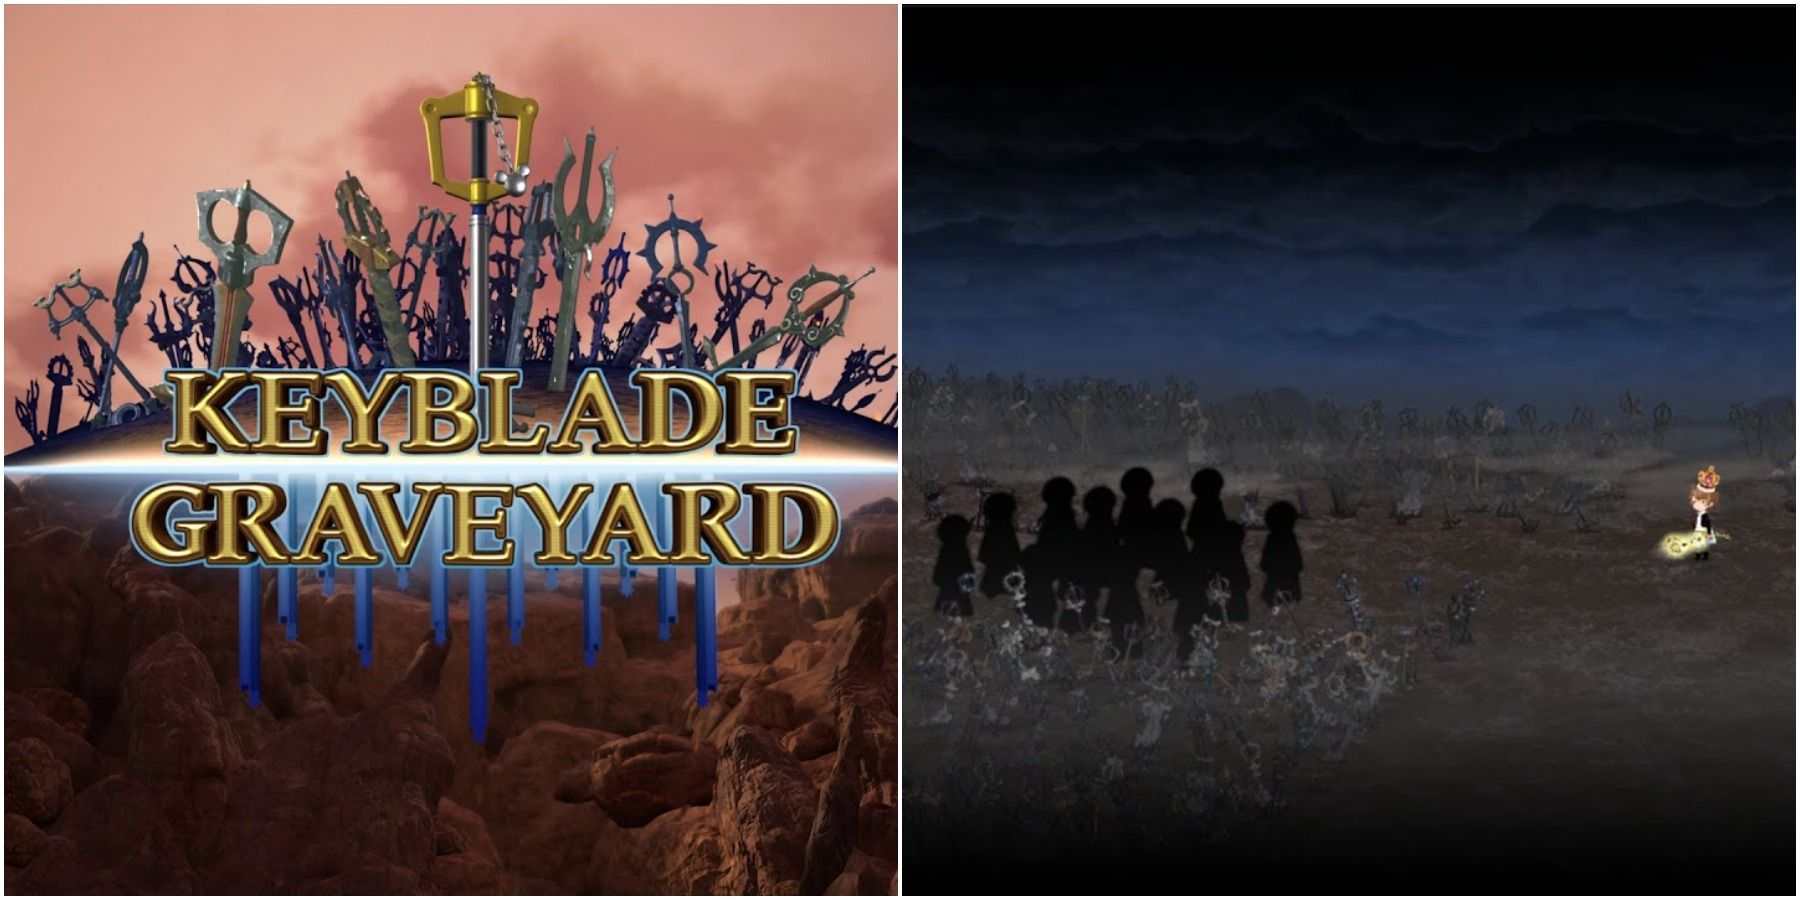 Split image of Keyblade Graveyard and the world title.